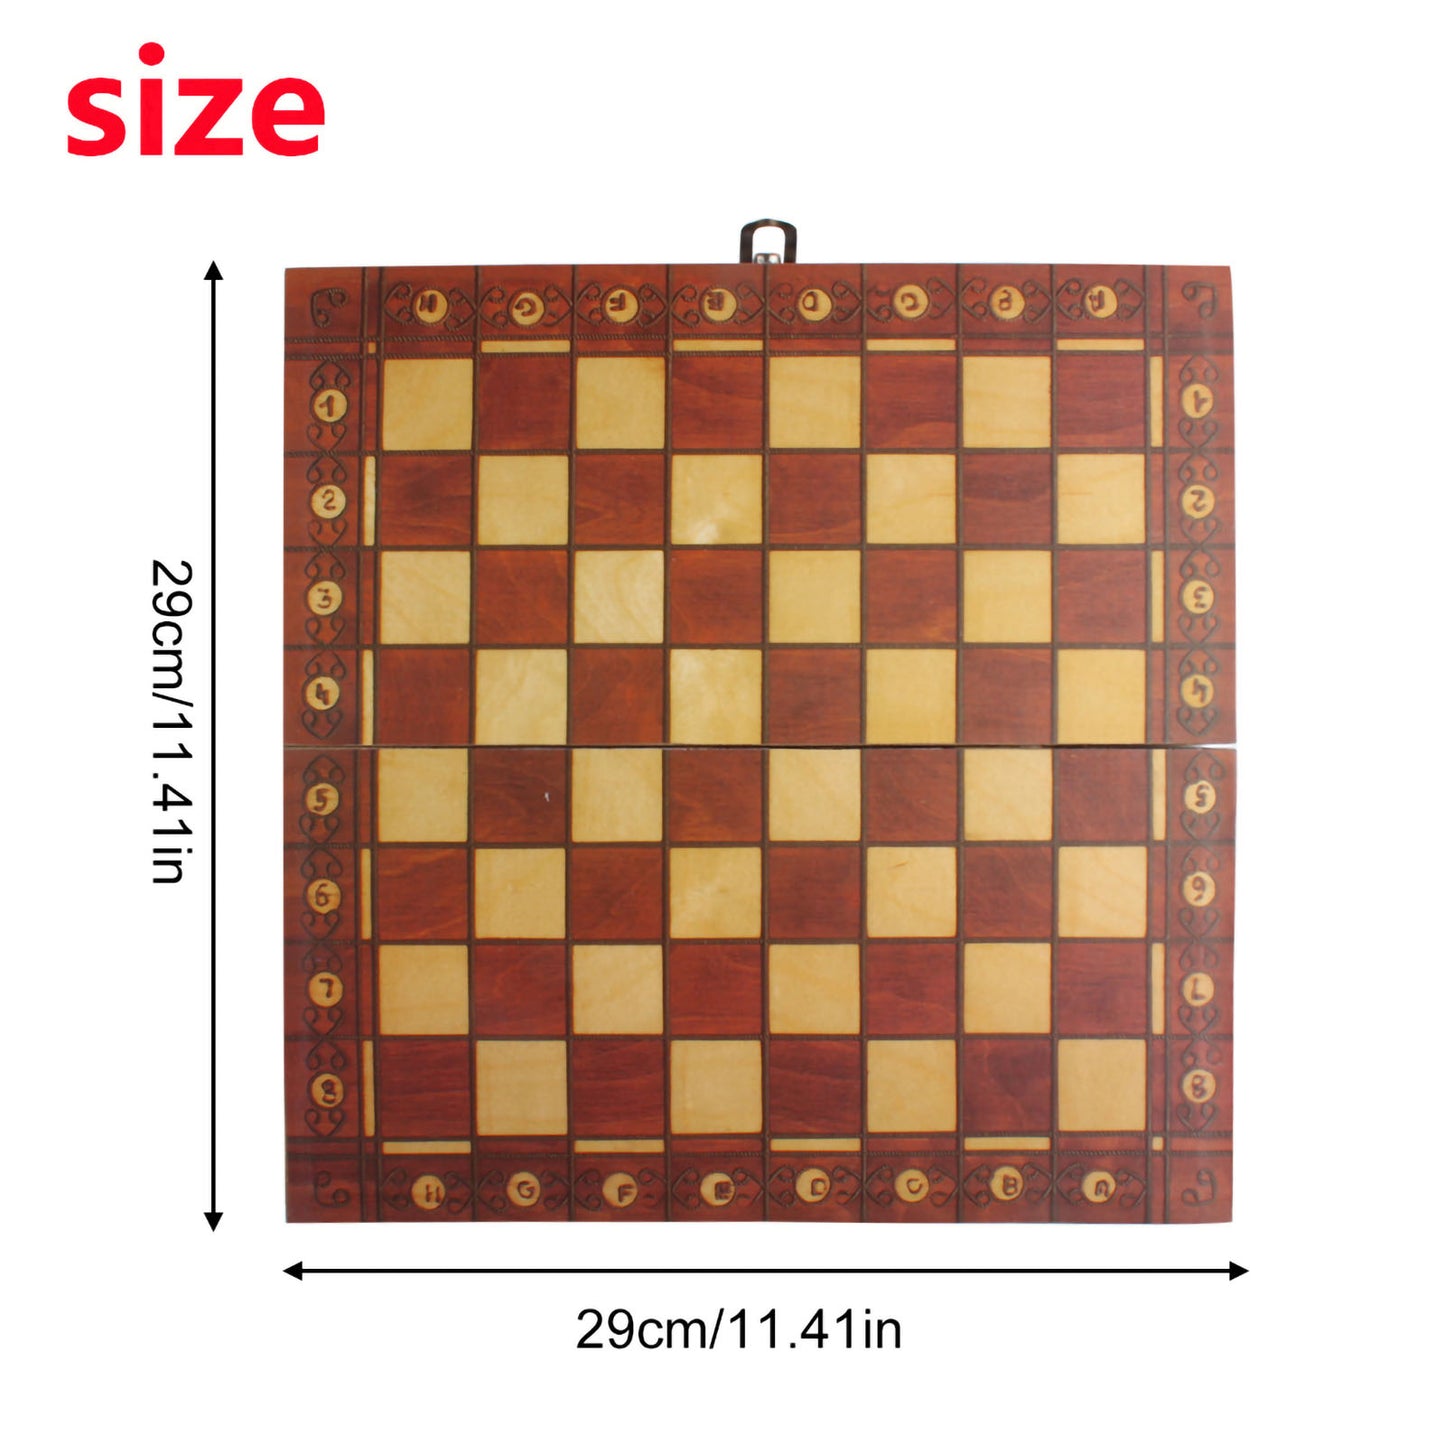 Andux Magnetic Wooden Folding Chess Set GJXQ-03 (11.4 X 11.4 inches)